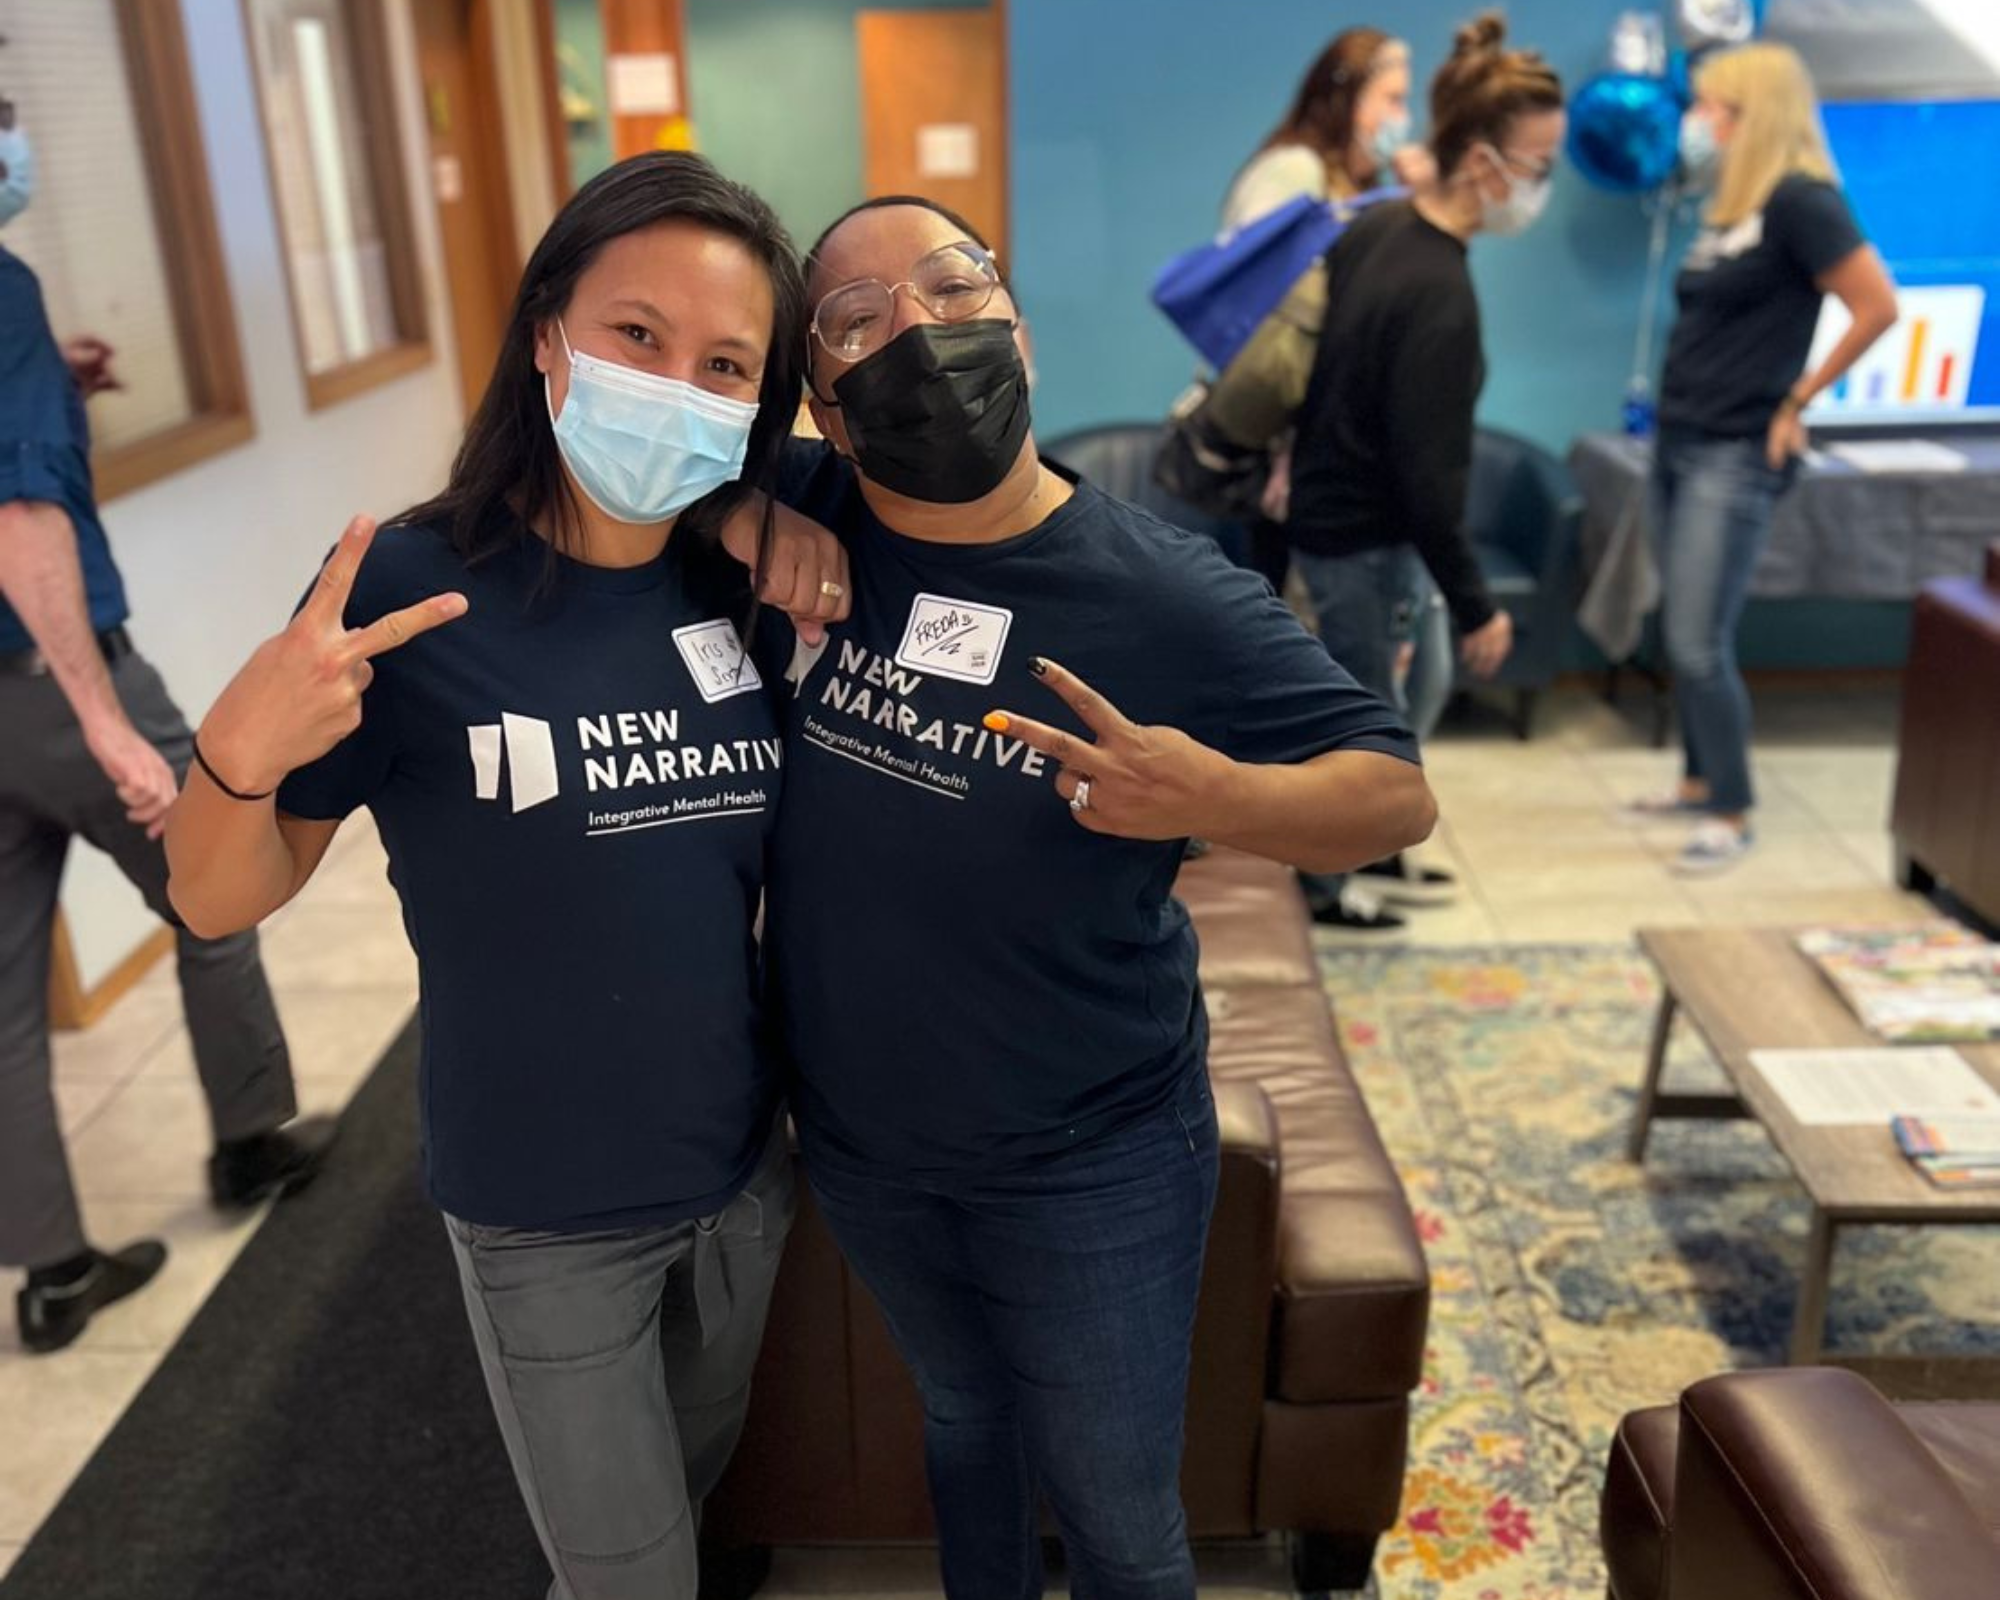 two New Narrative staff, both BIPOC women, throw peace signs at the camera while wearing their dark blue New Narrative tshirts.